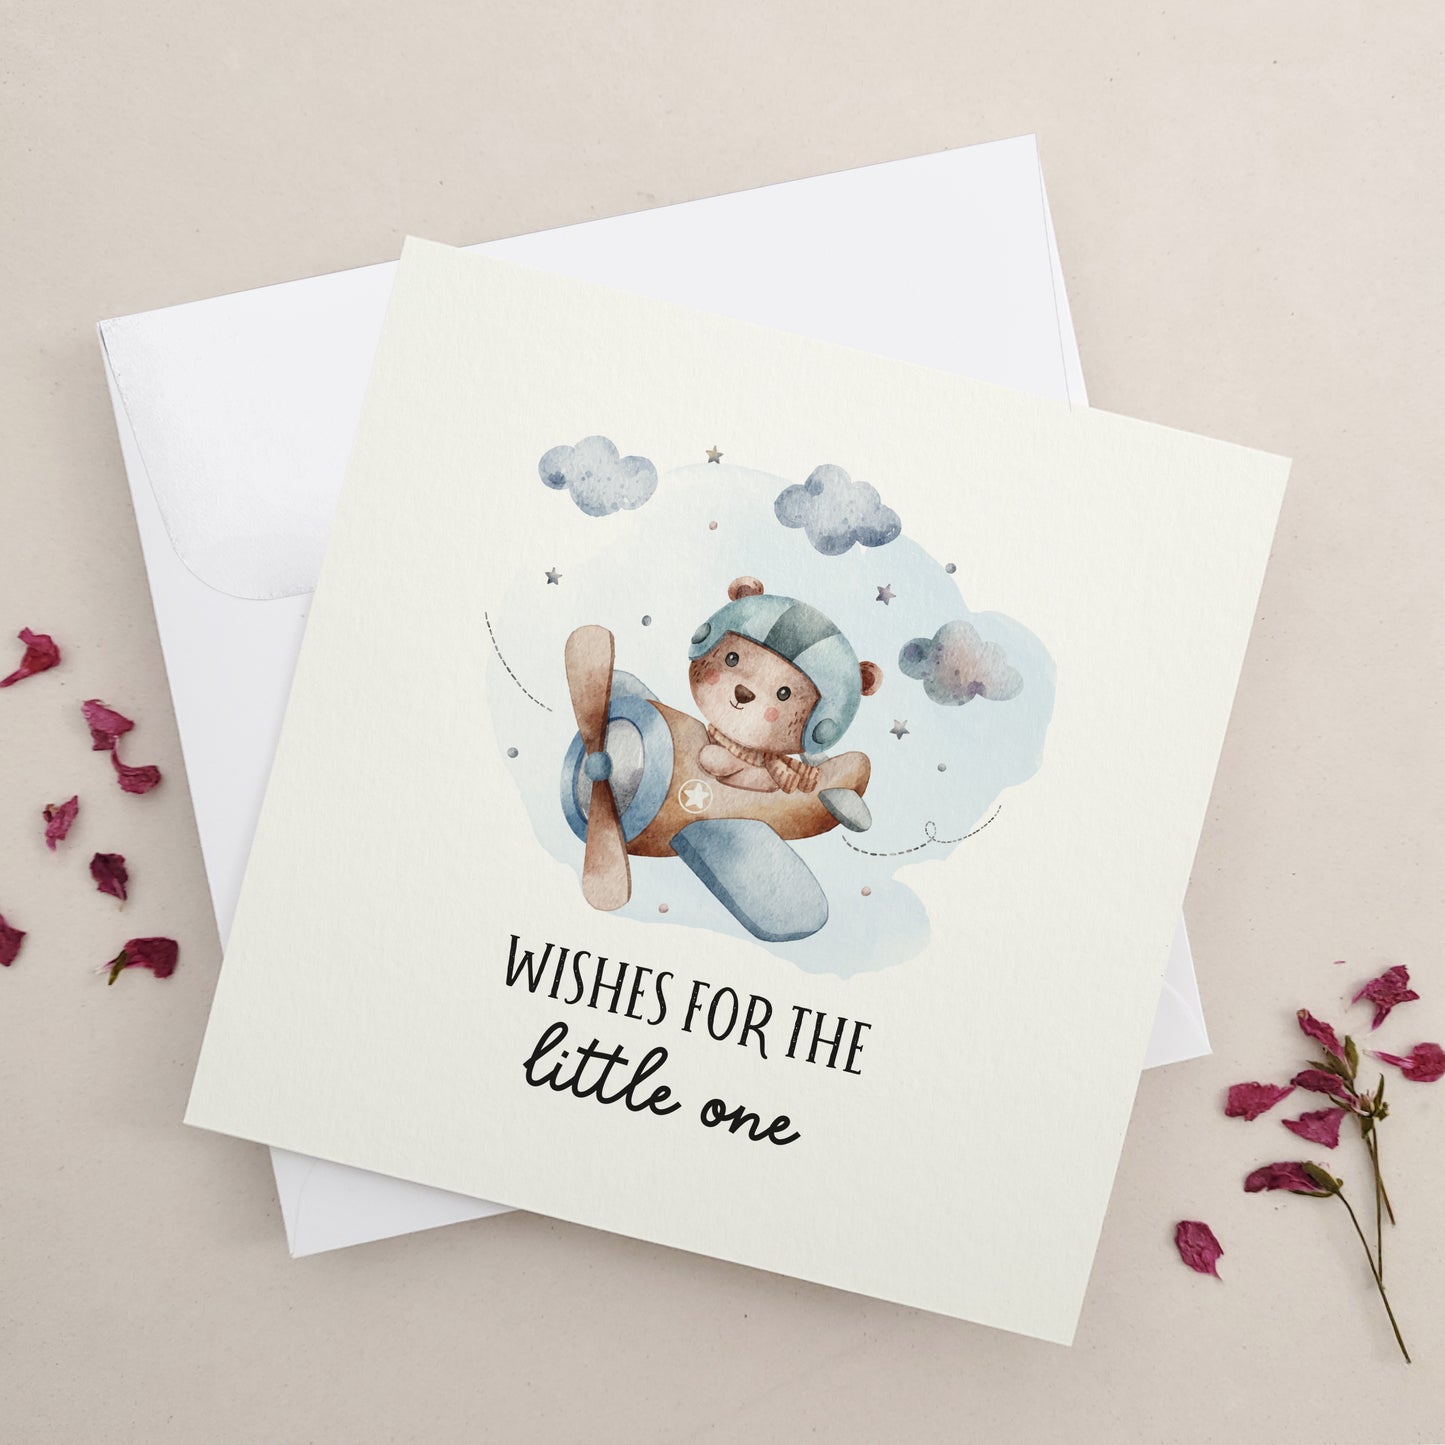 wishes for the little one card to congratulate on a new baby  - XOXOKristen